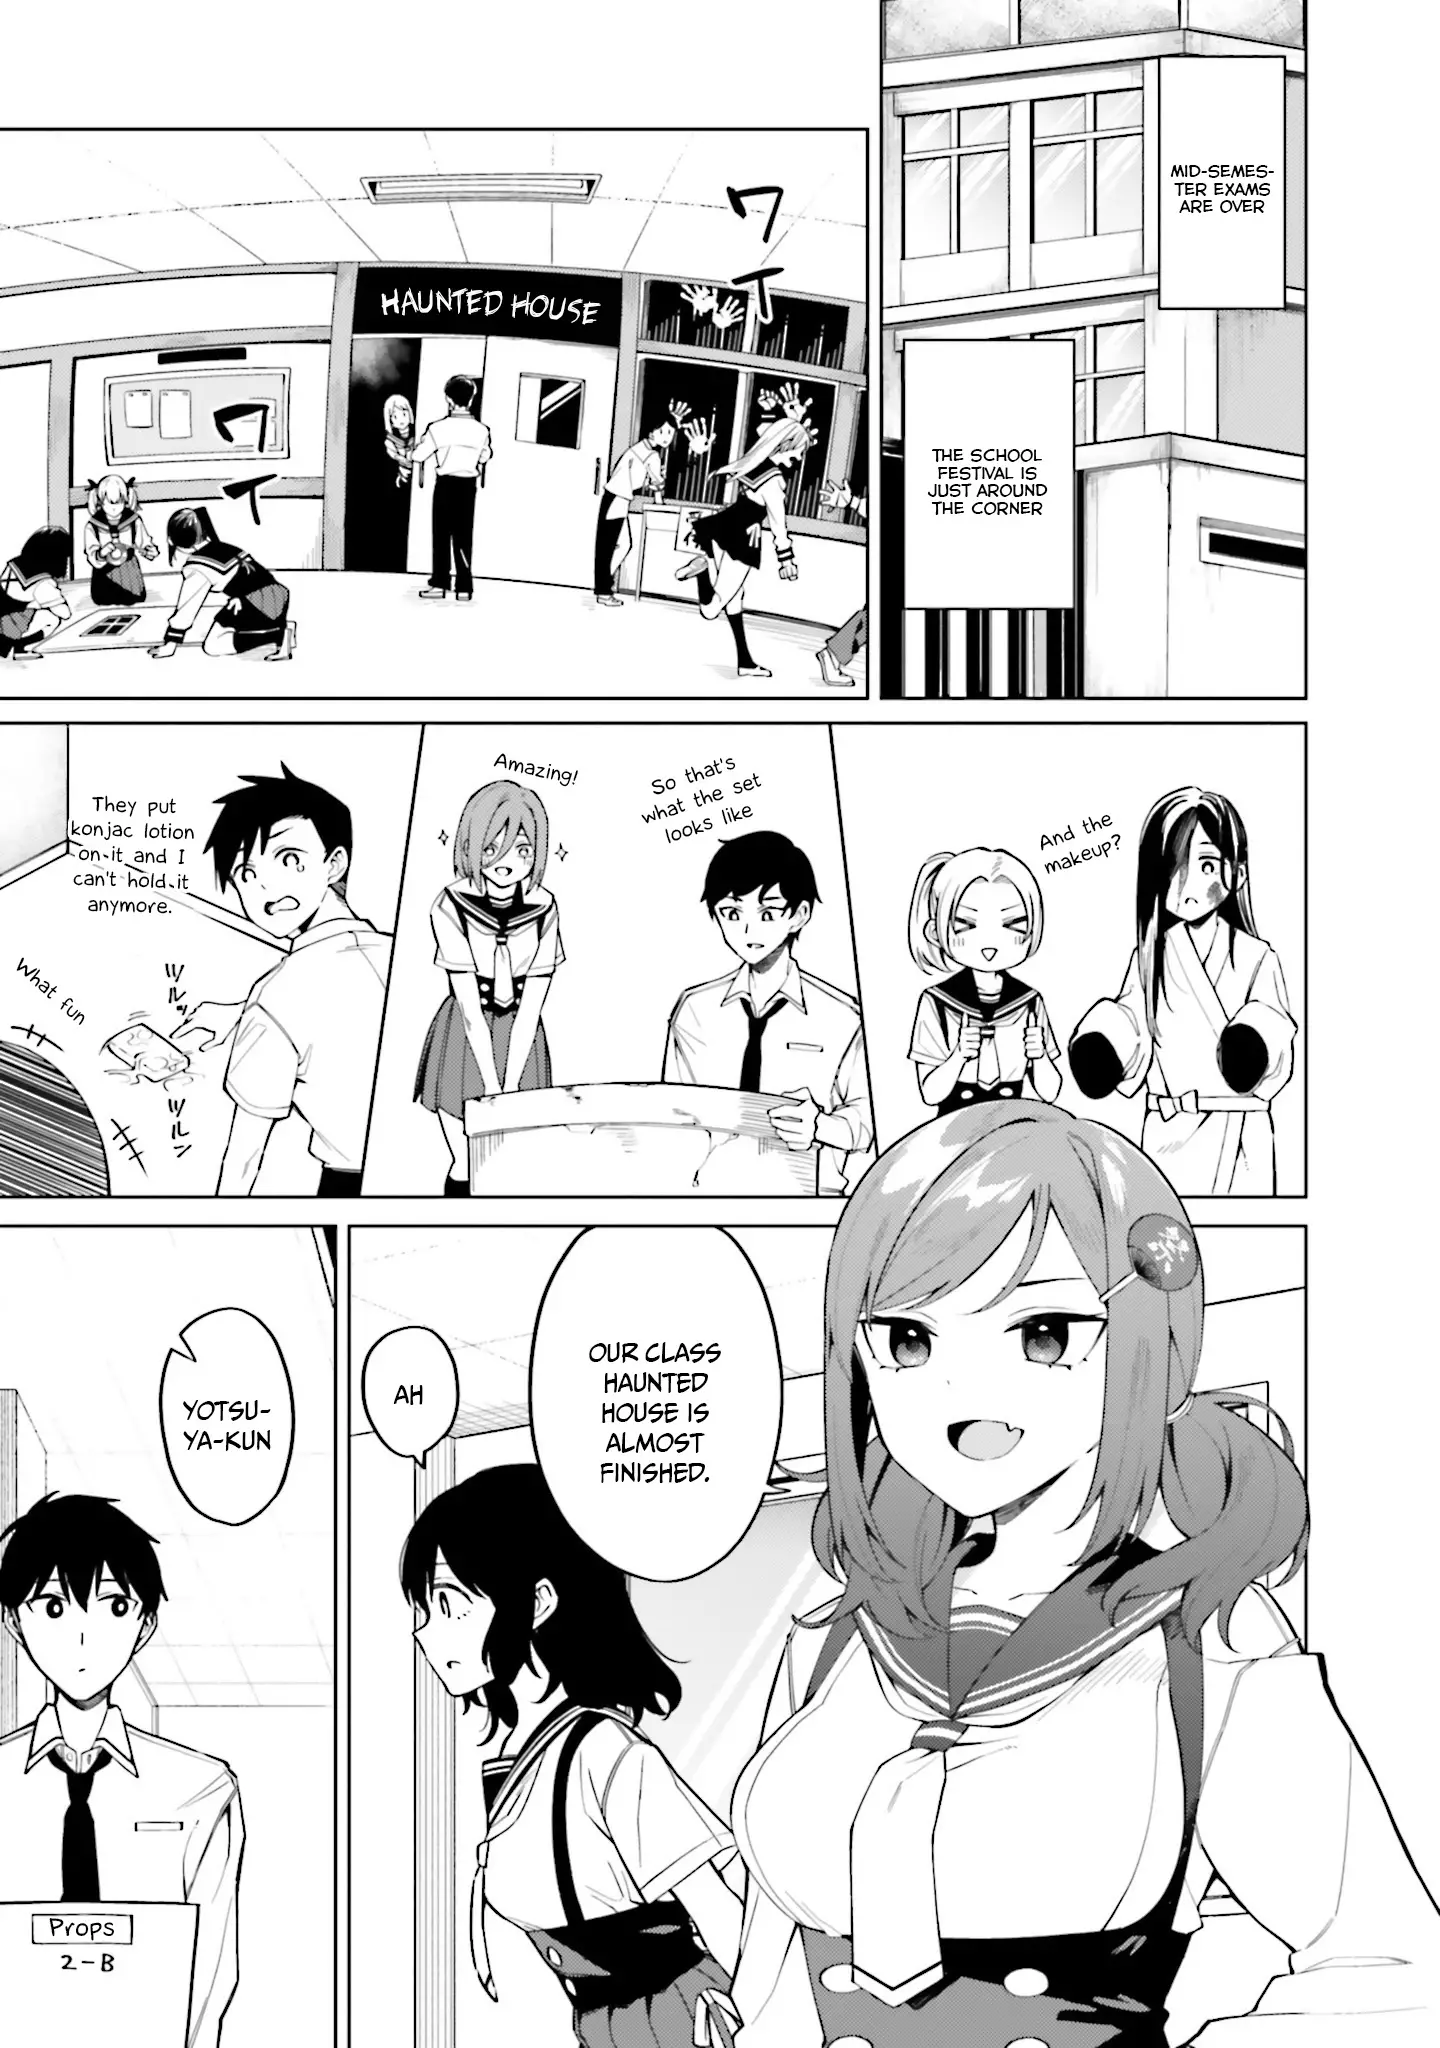 I Don't Understand Shirogane-San's Facial Expression At All - 12 page 2-45c32530